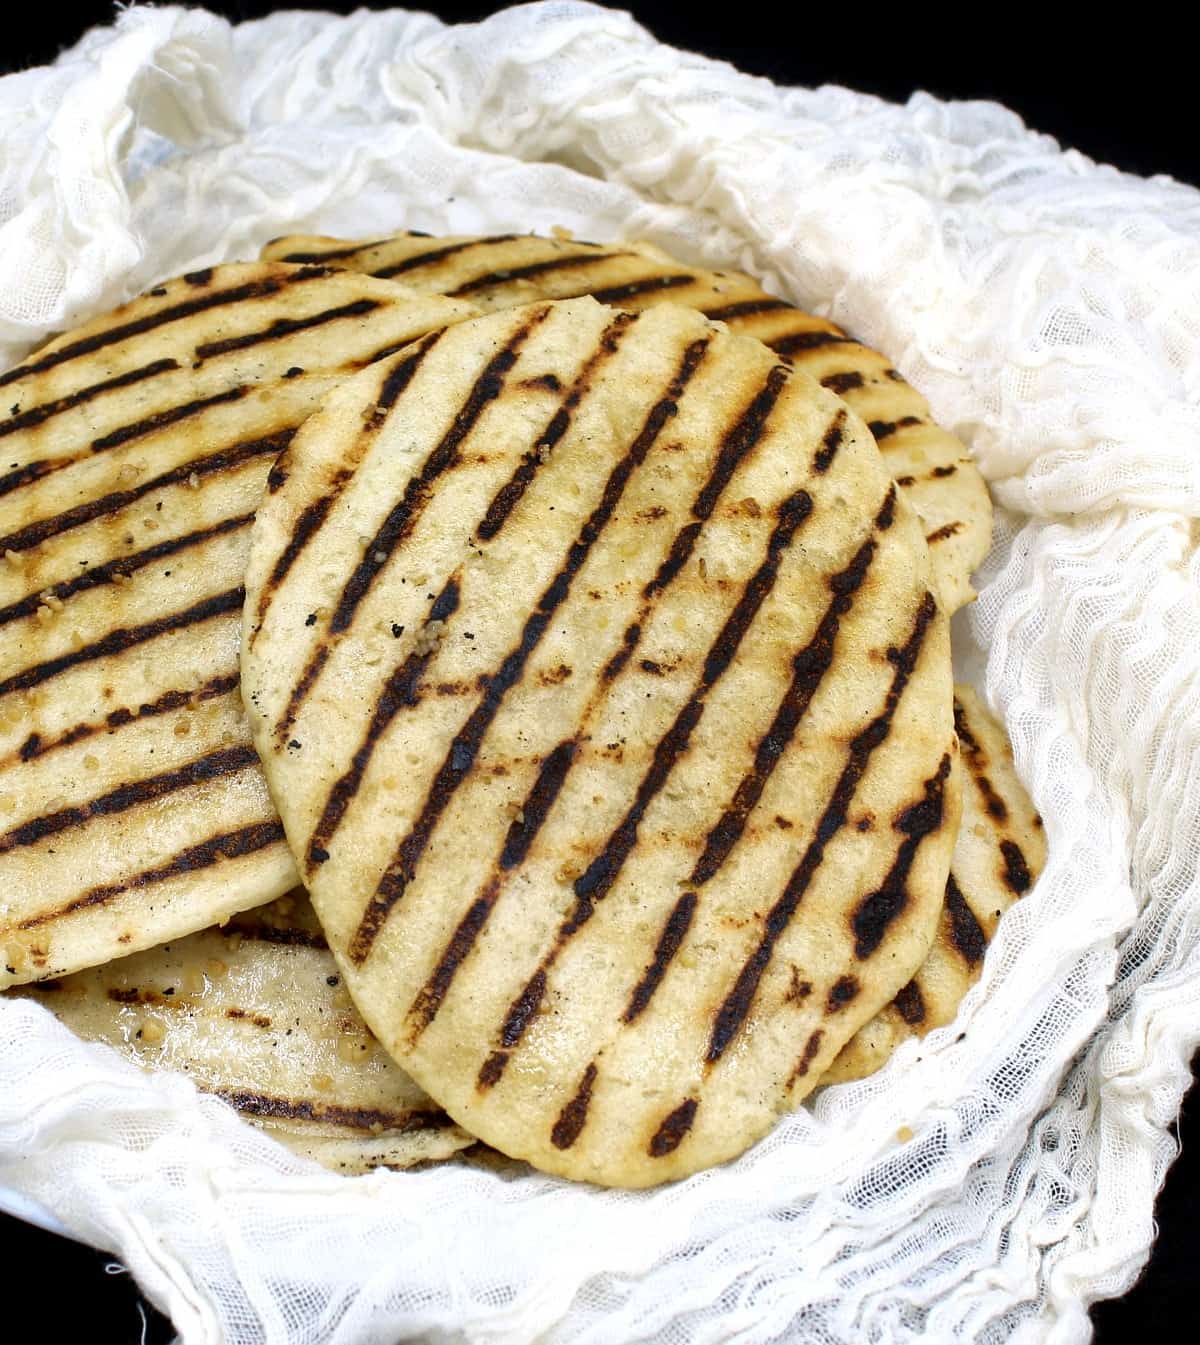 A stack of grilled vegan gluten free naans on a white plate wrapped in cheesecloth on a black background.